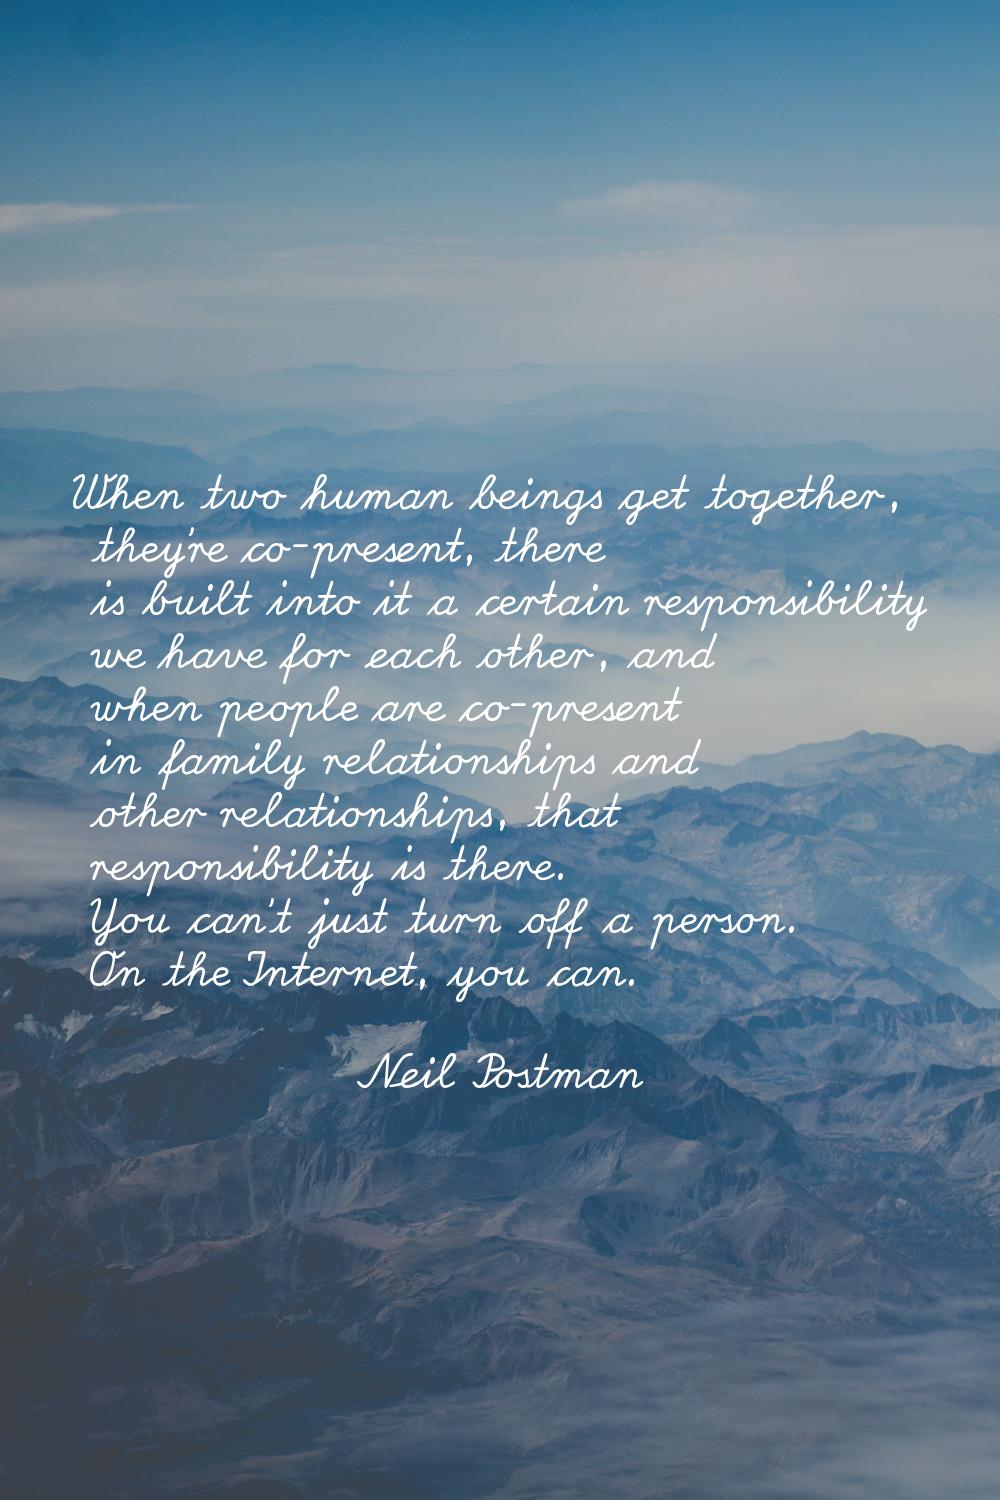 When two human beings get together, they're co-present, there is built into it a certain responsibi